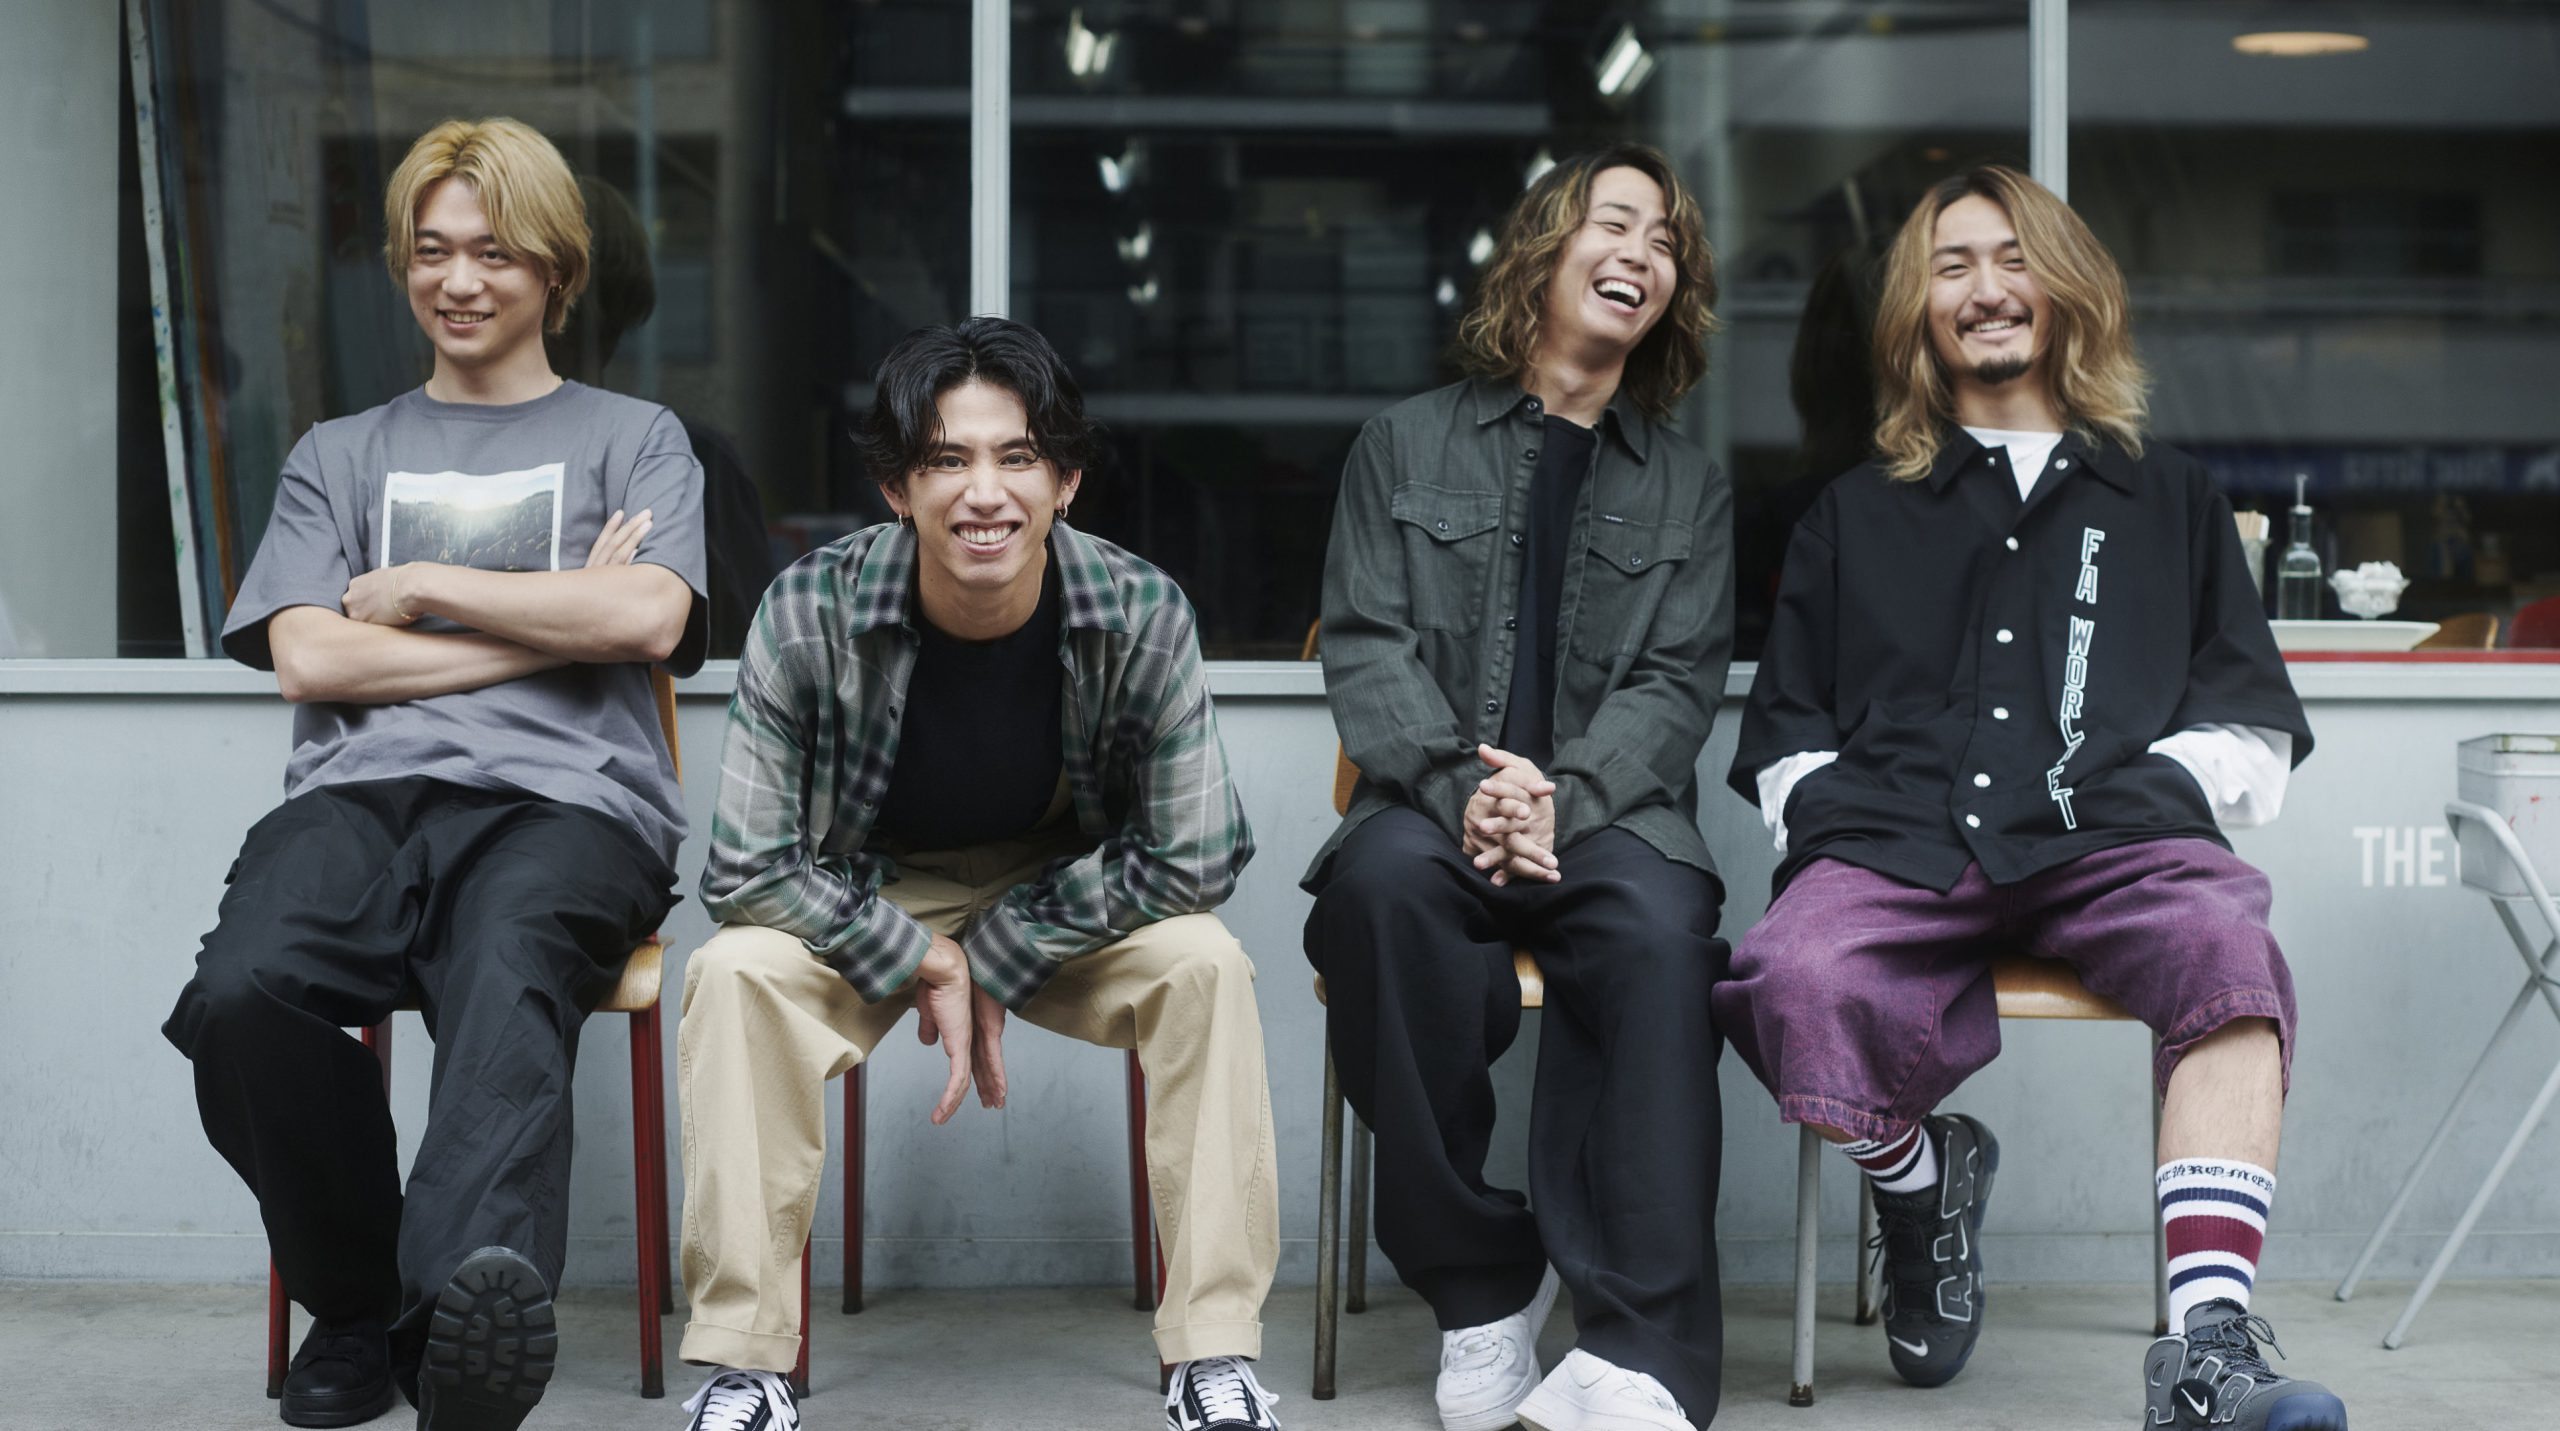 ABOUT - ONE OK ROCK official website by 10969 Inc.